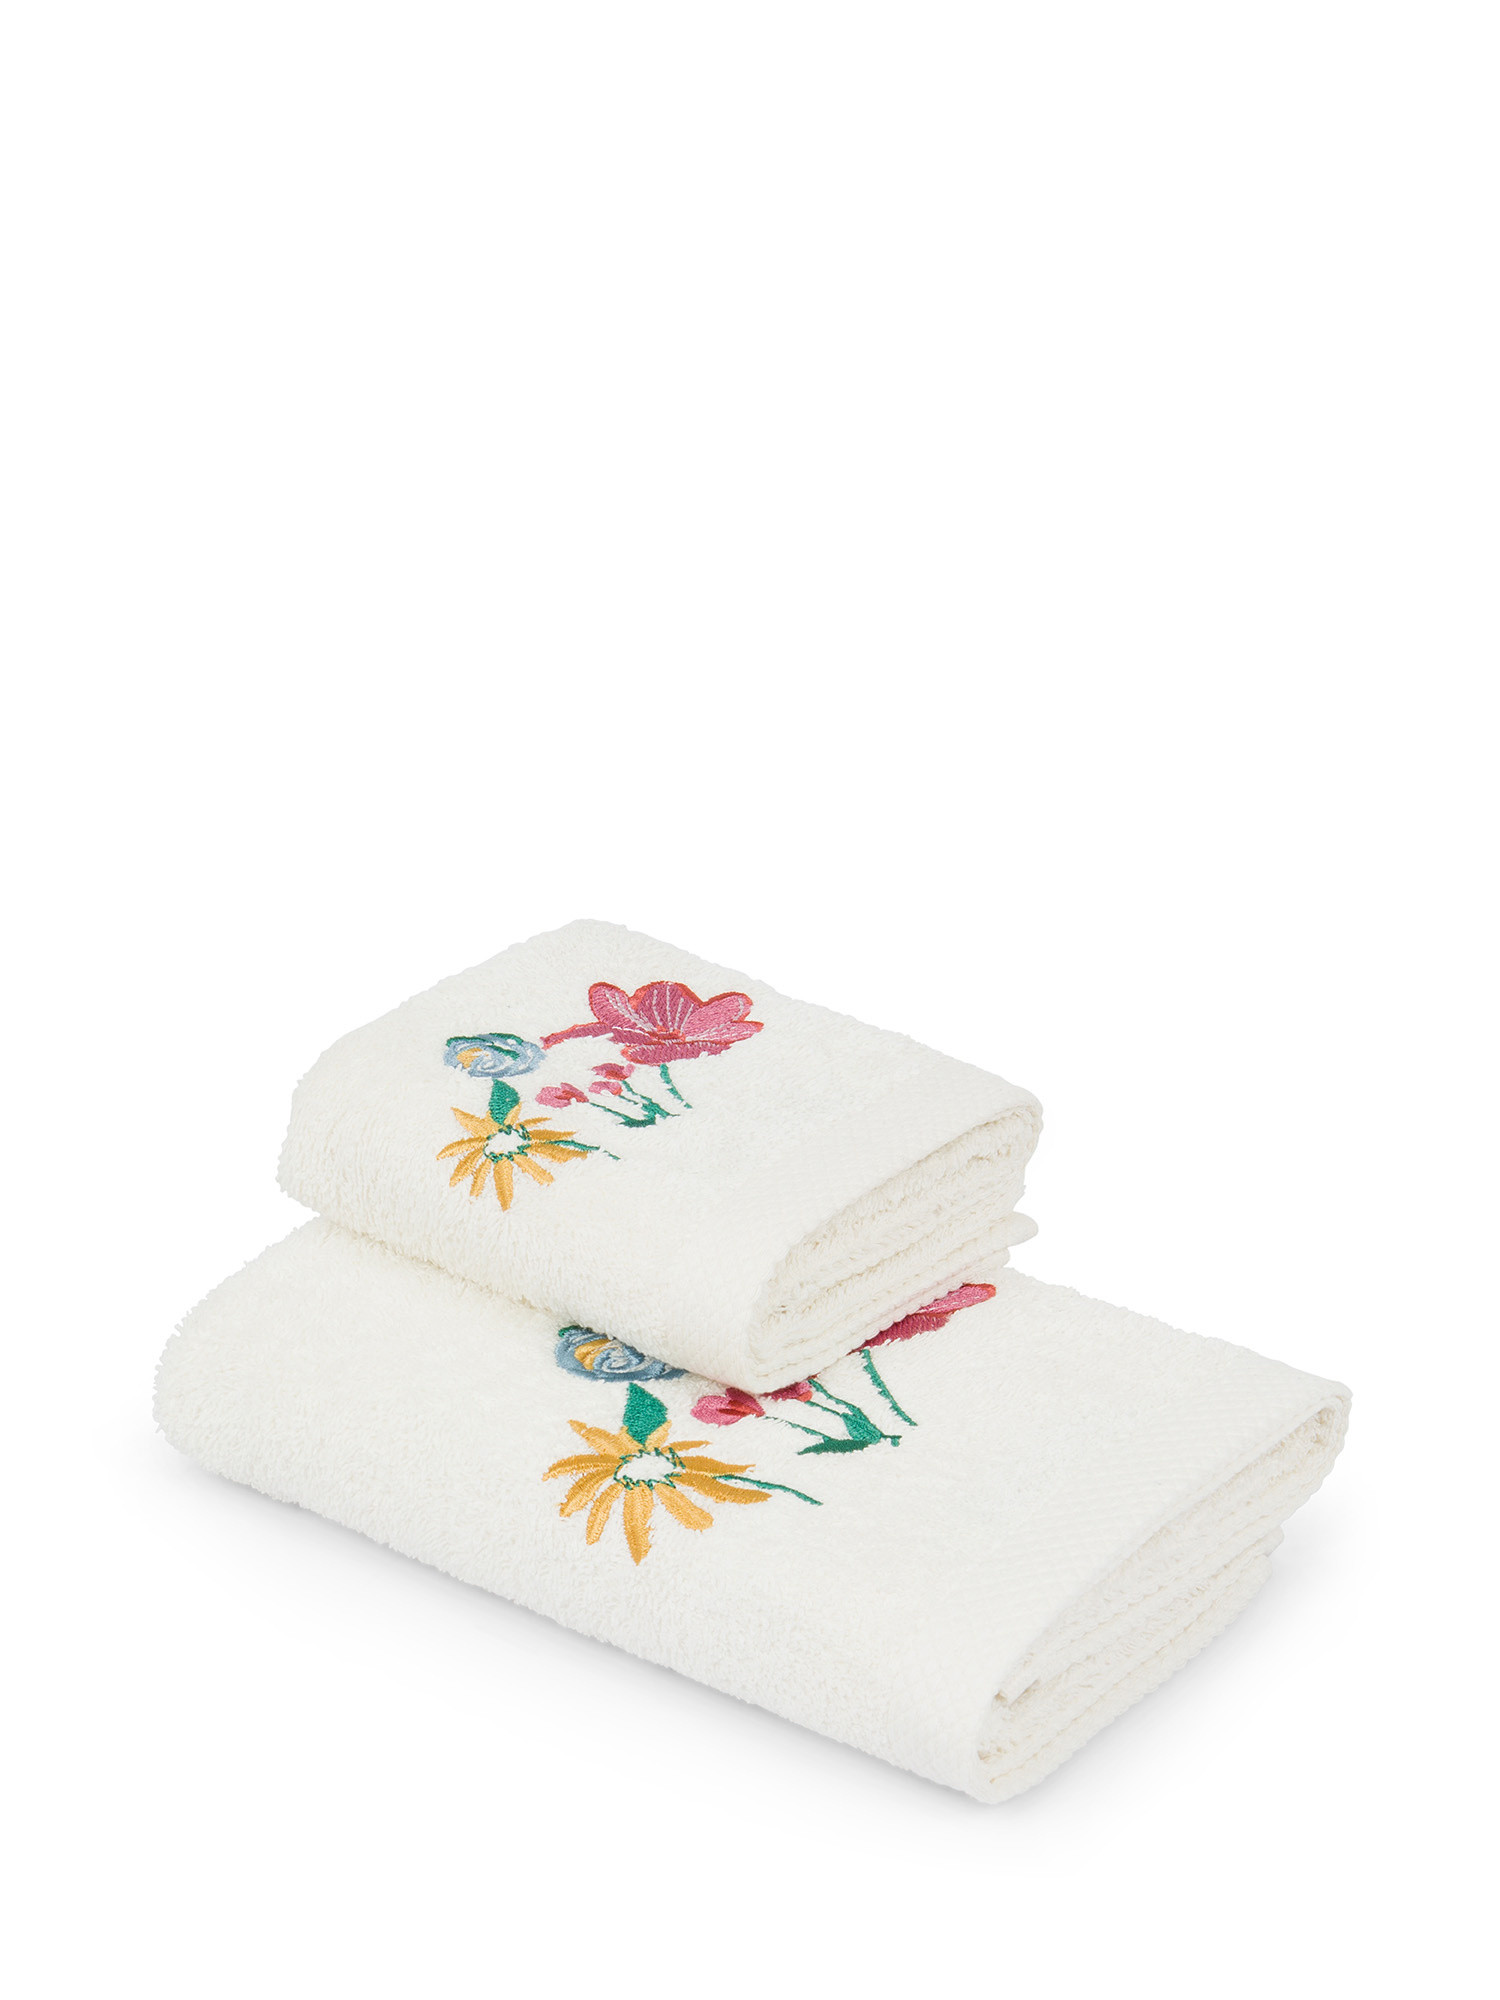 Cotton terry towel with floral embroidery, Multicolor, large image number 0